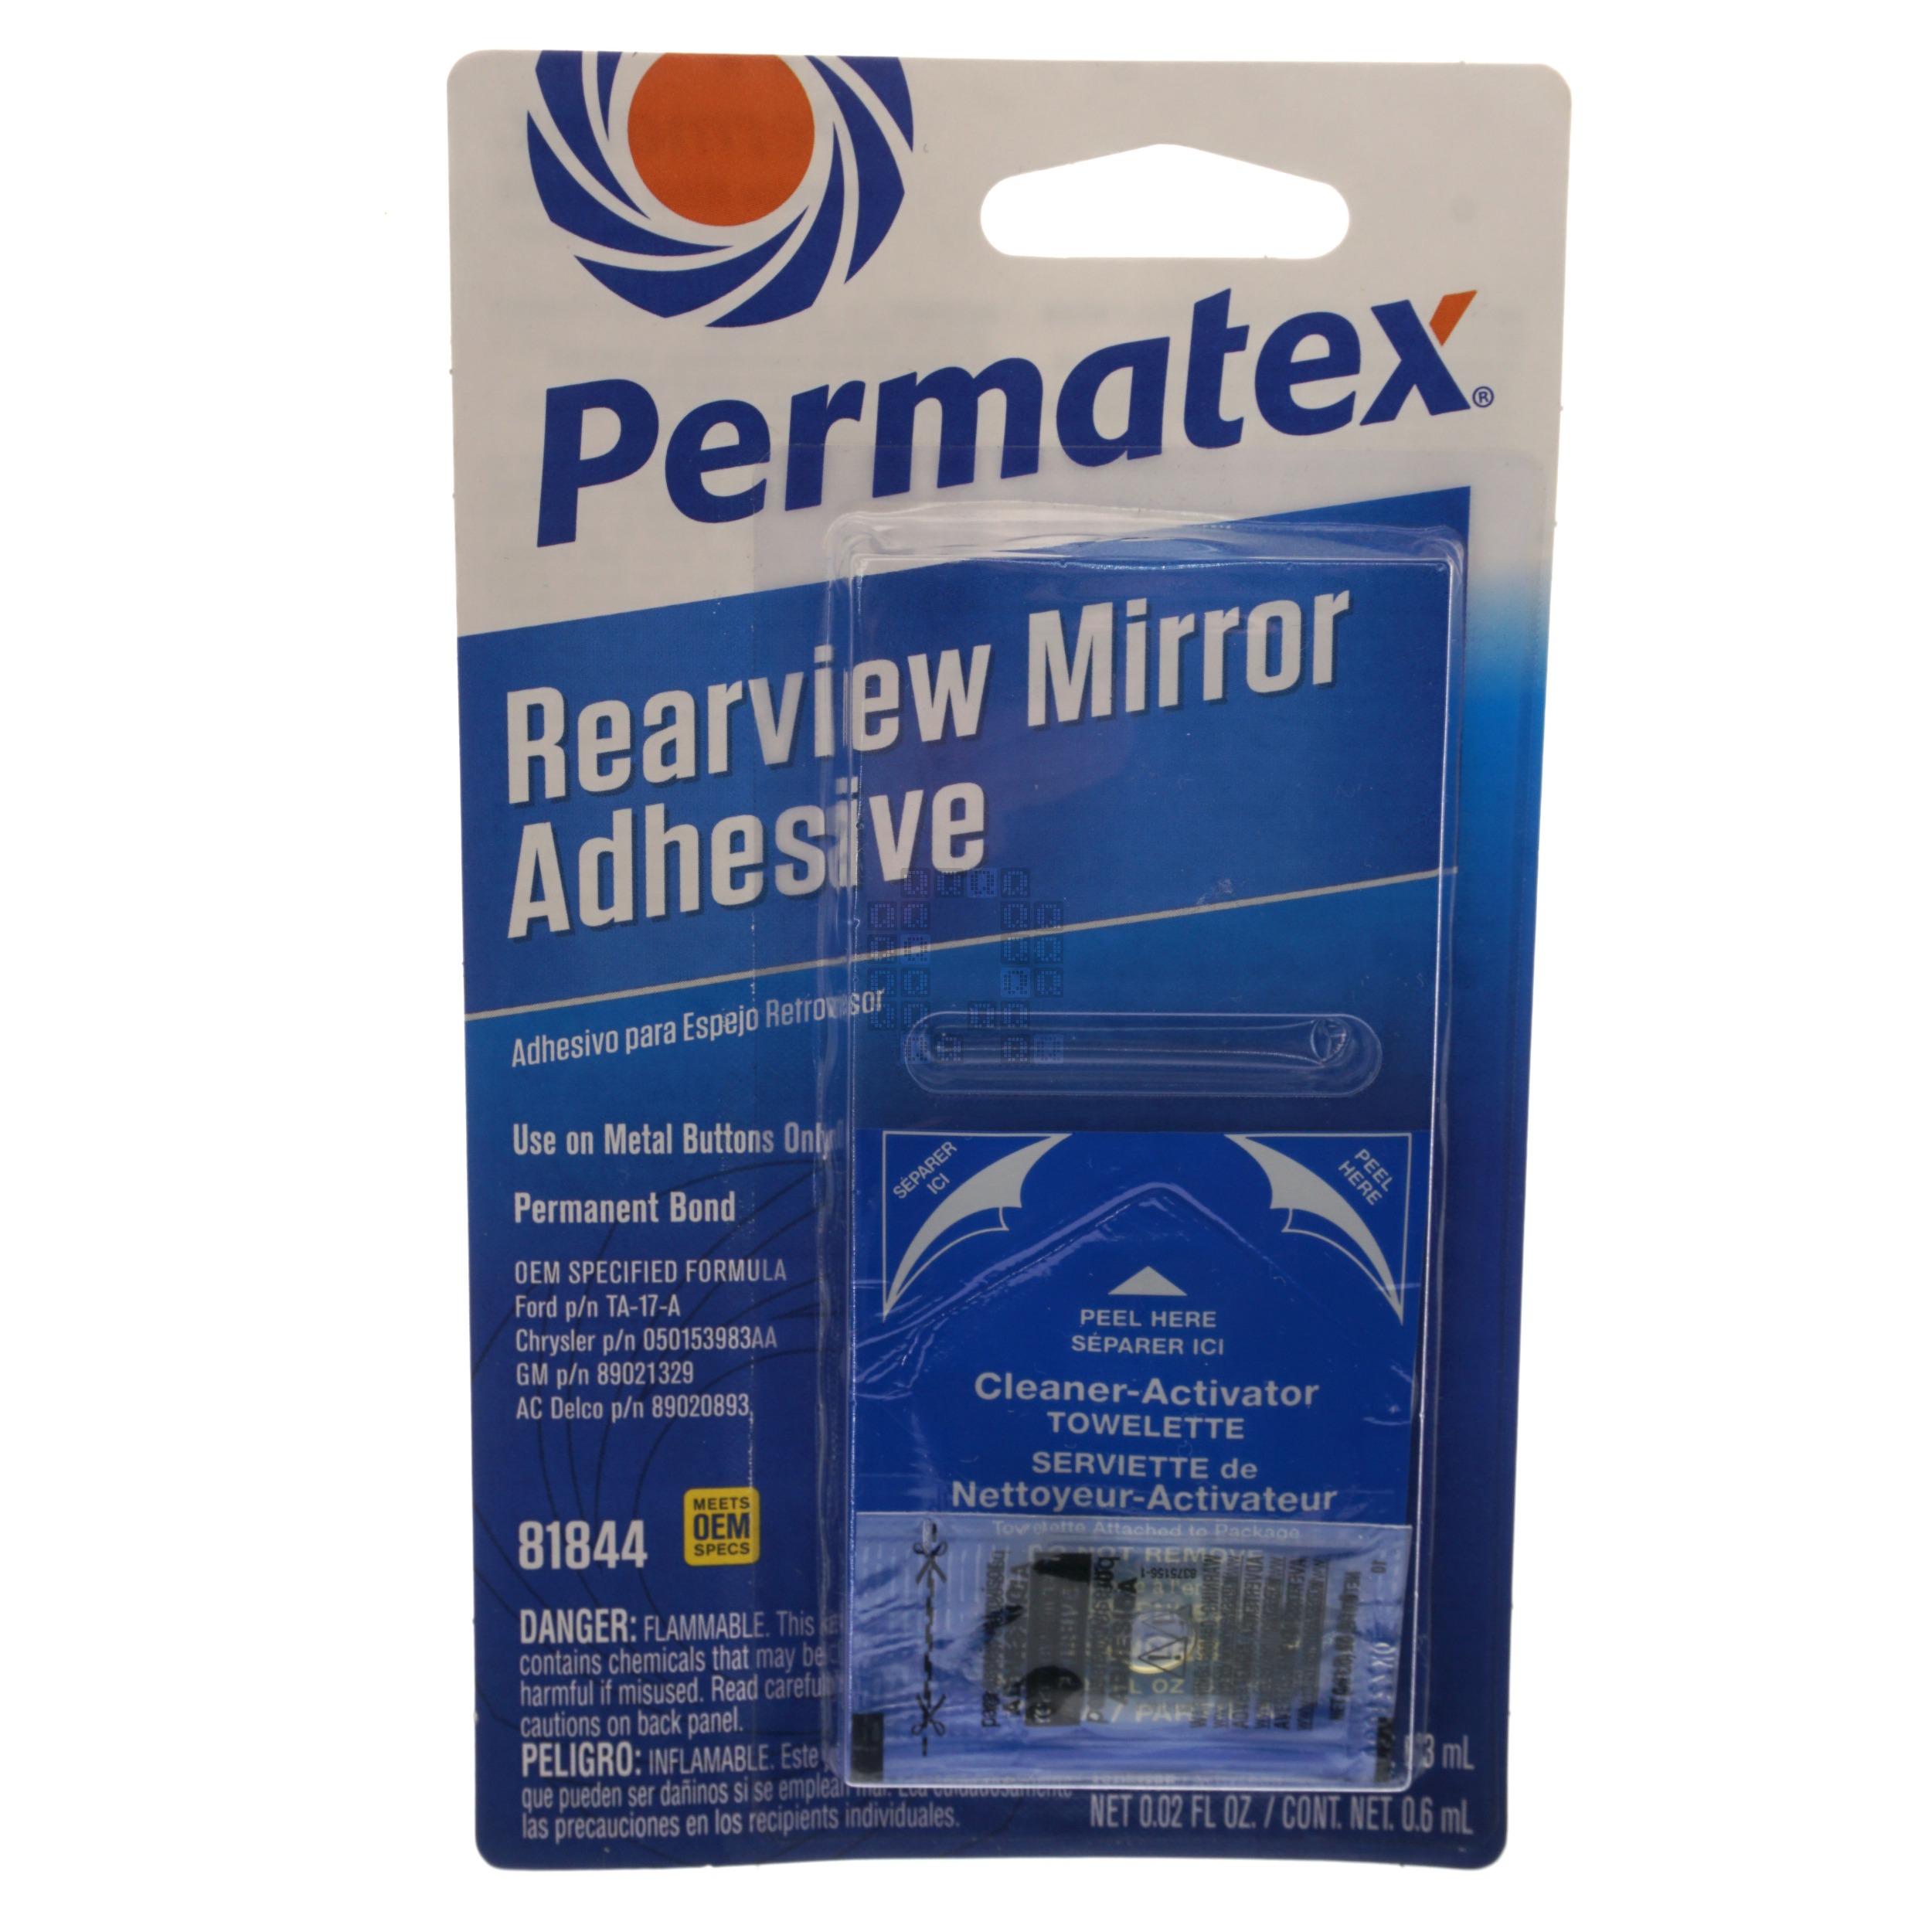 Permatex 81844 Permanent Bond Rearview Mirror Adhesive for Metal Buttons